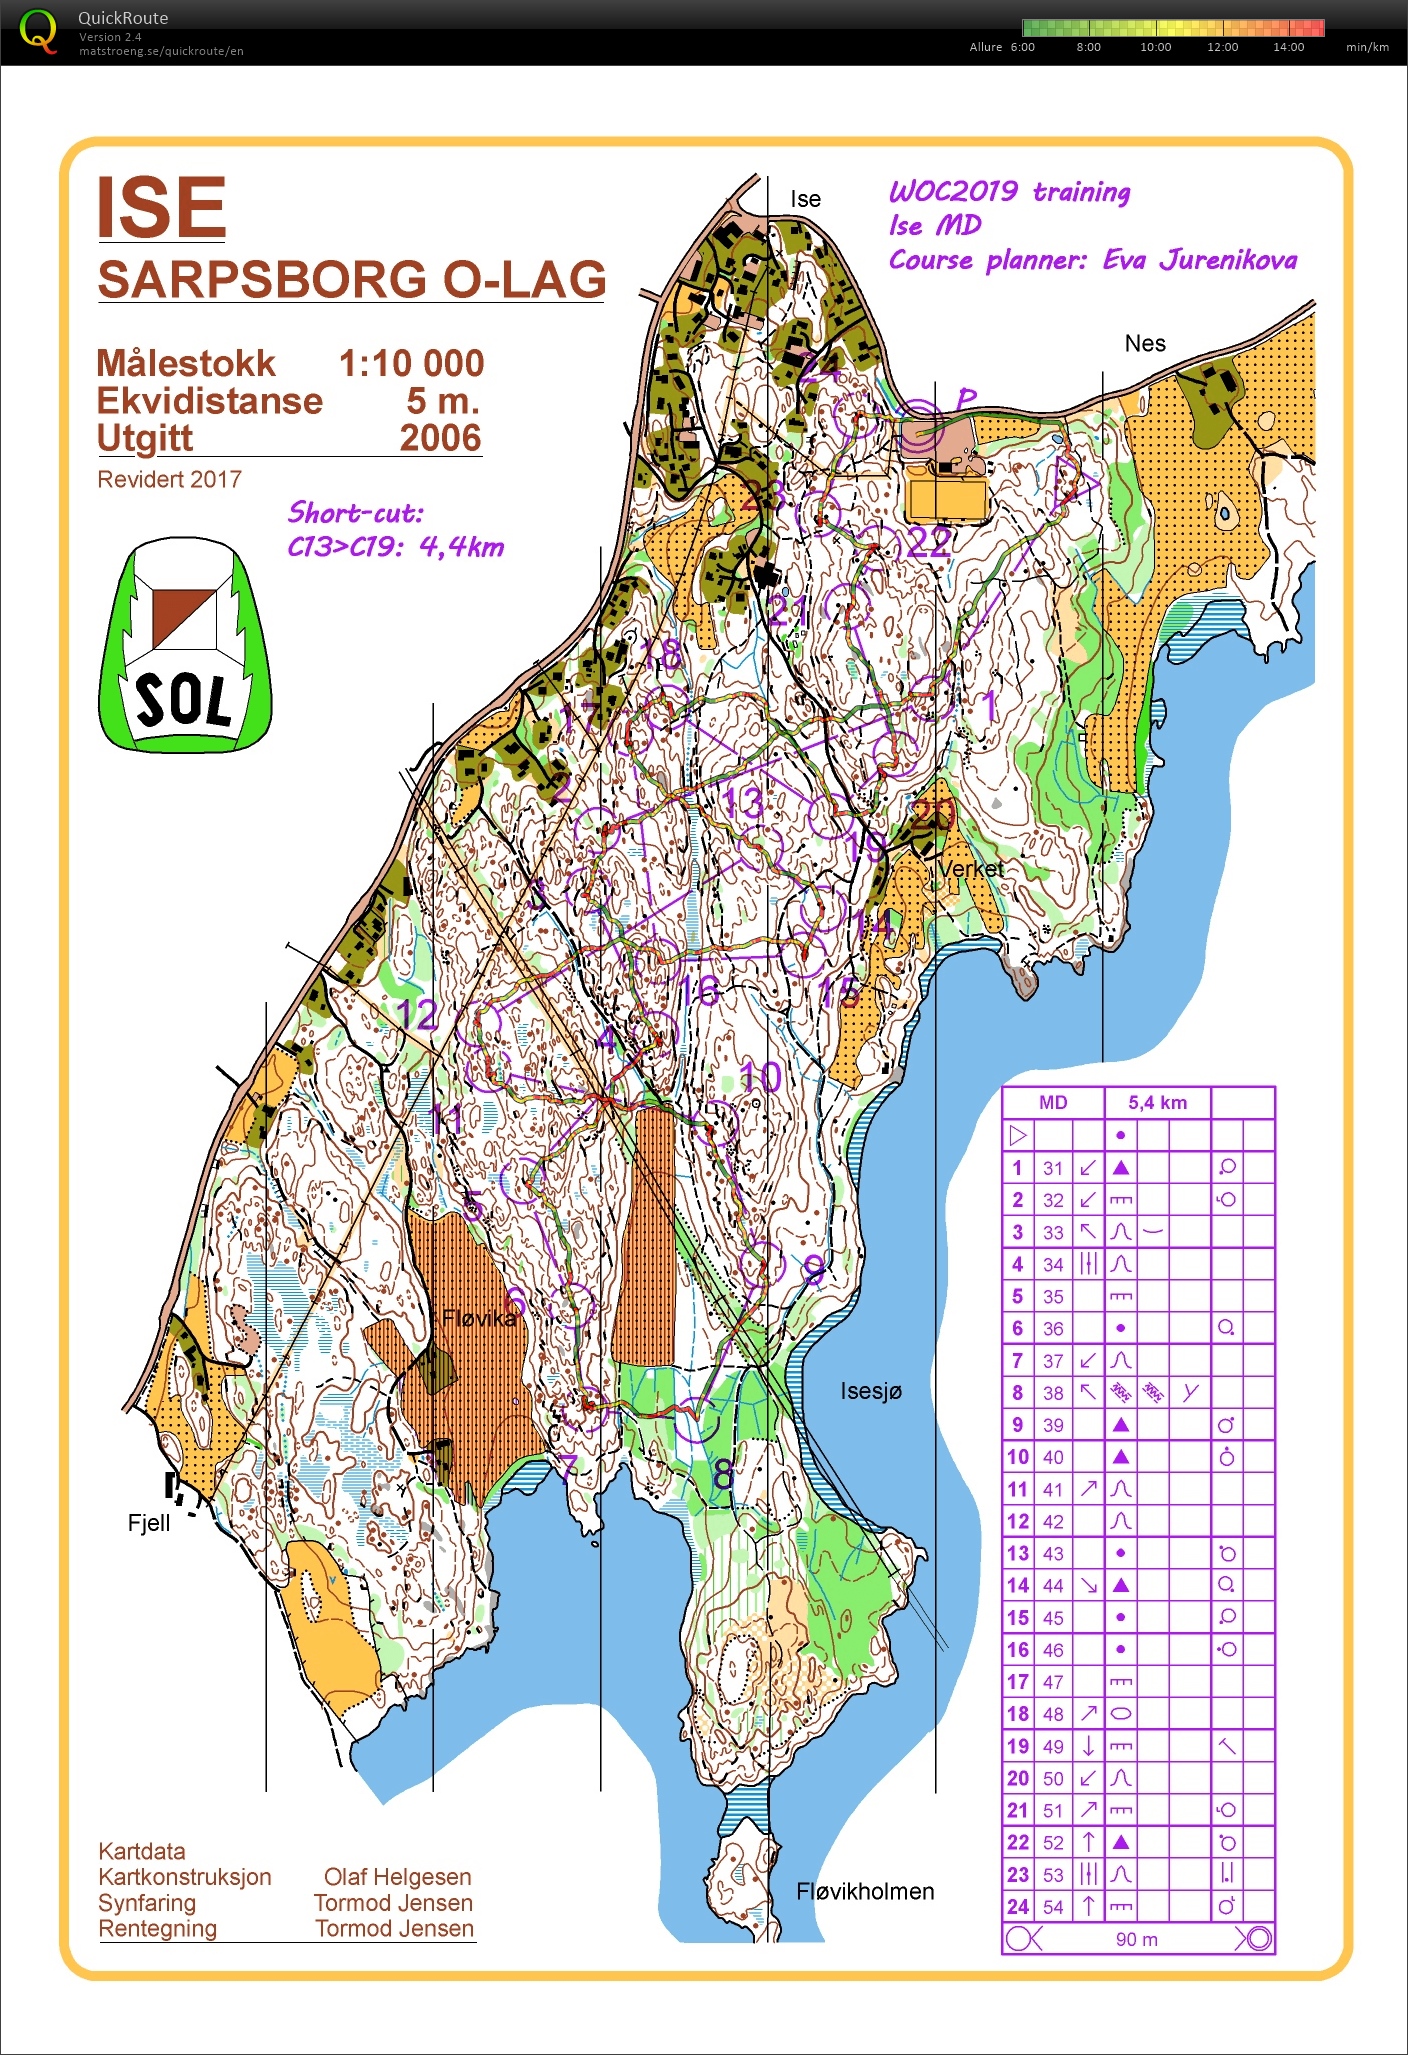 WOC 2019 training package /// pose MD Ise (2018-06-13)